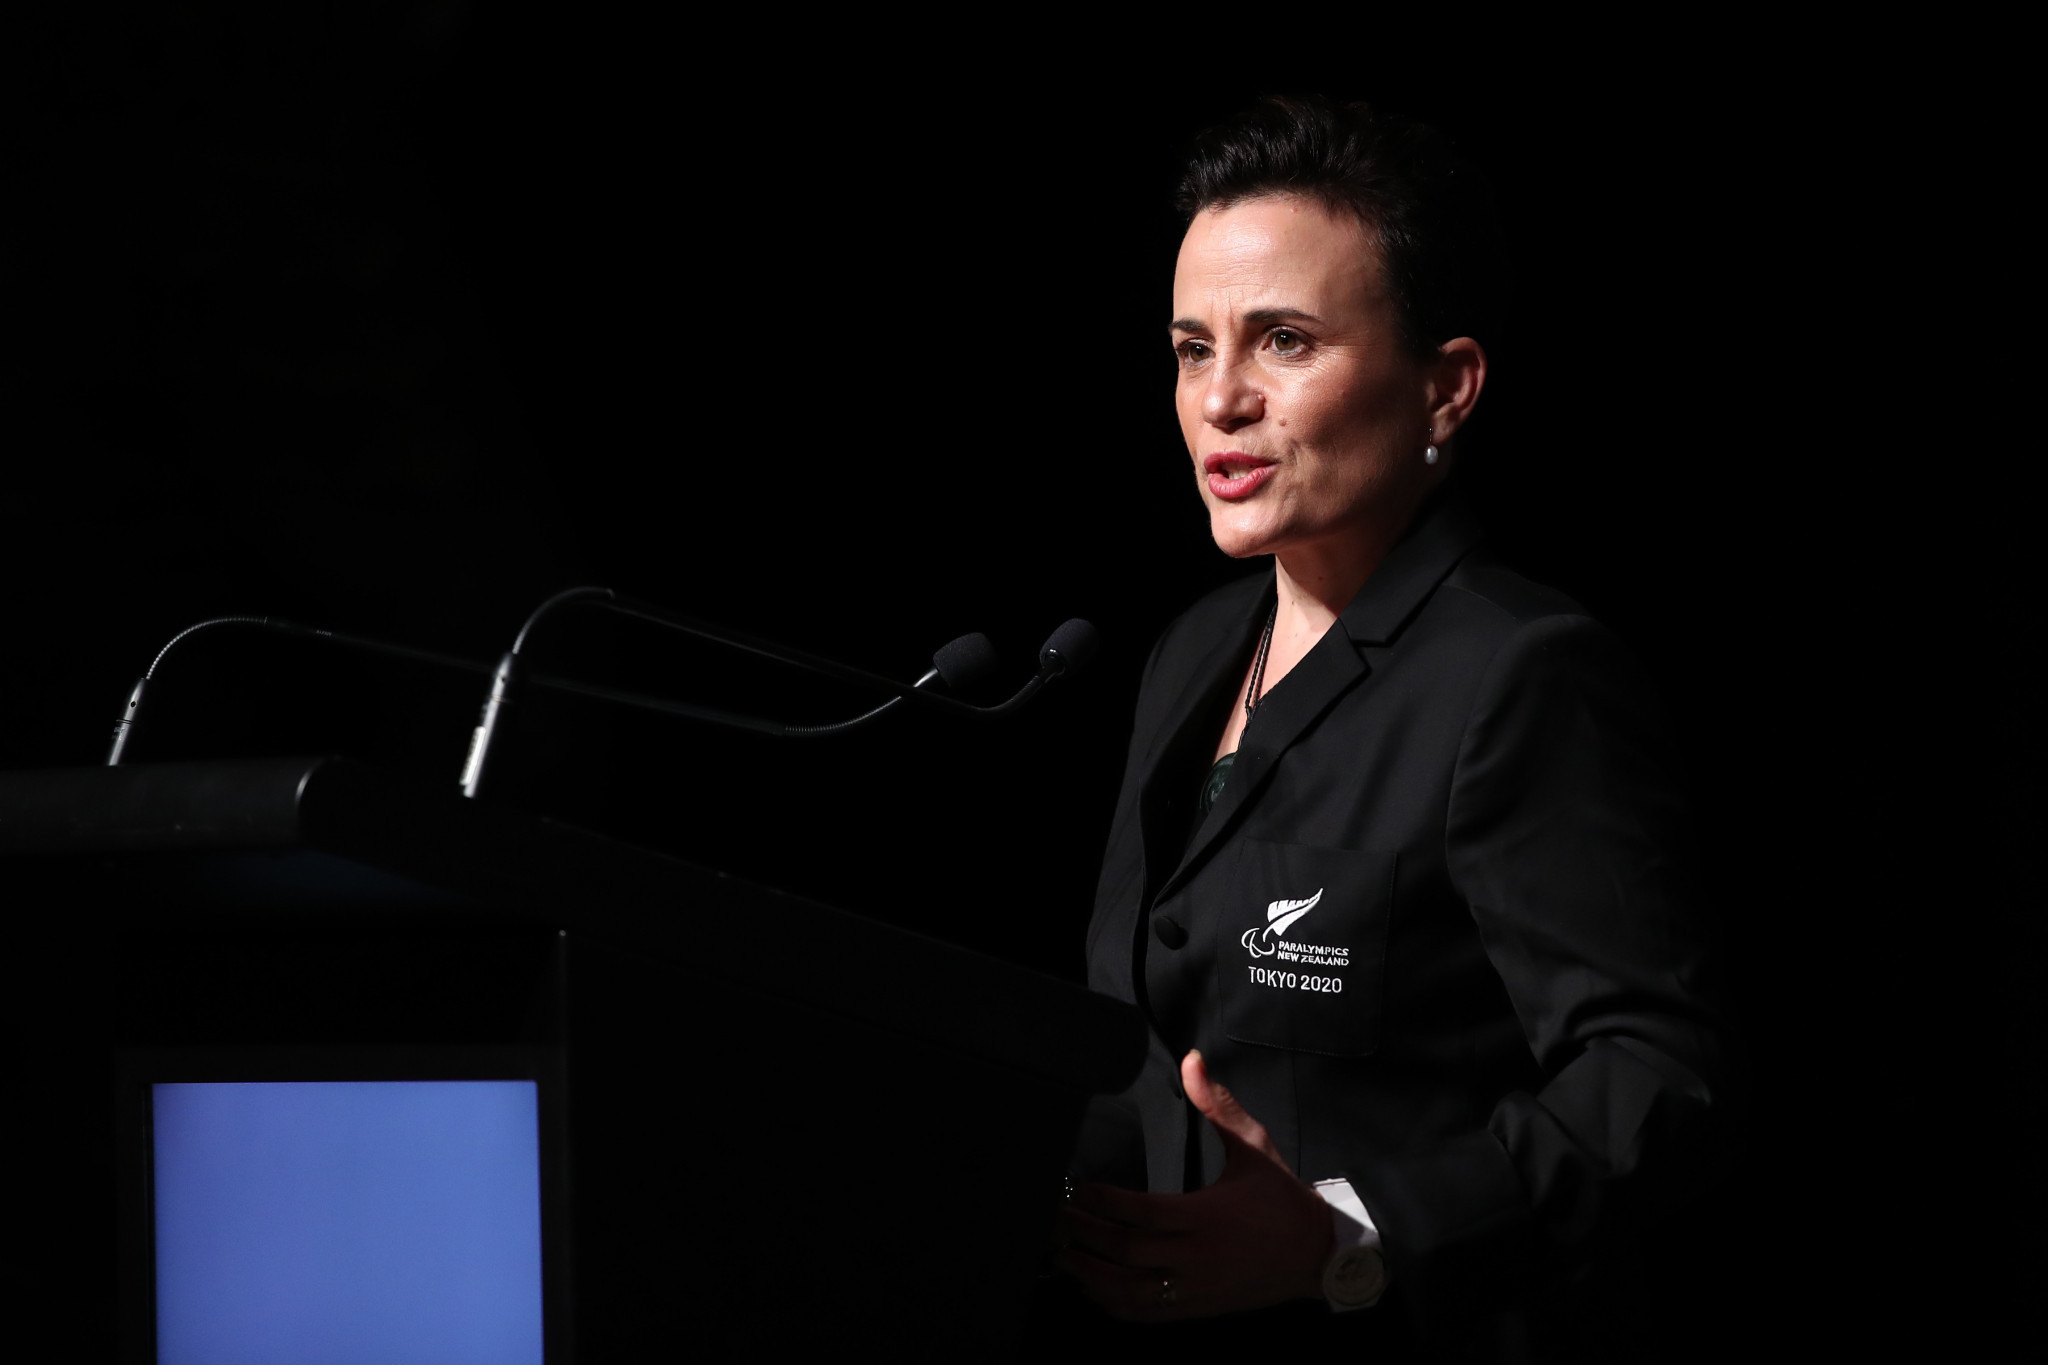 New Zealand's Chef de Mission Paula Tesoriero said the Opening Ceremony was 